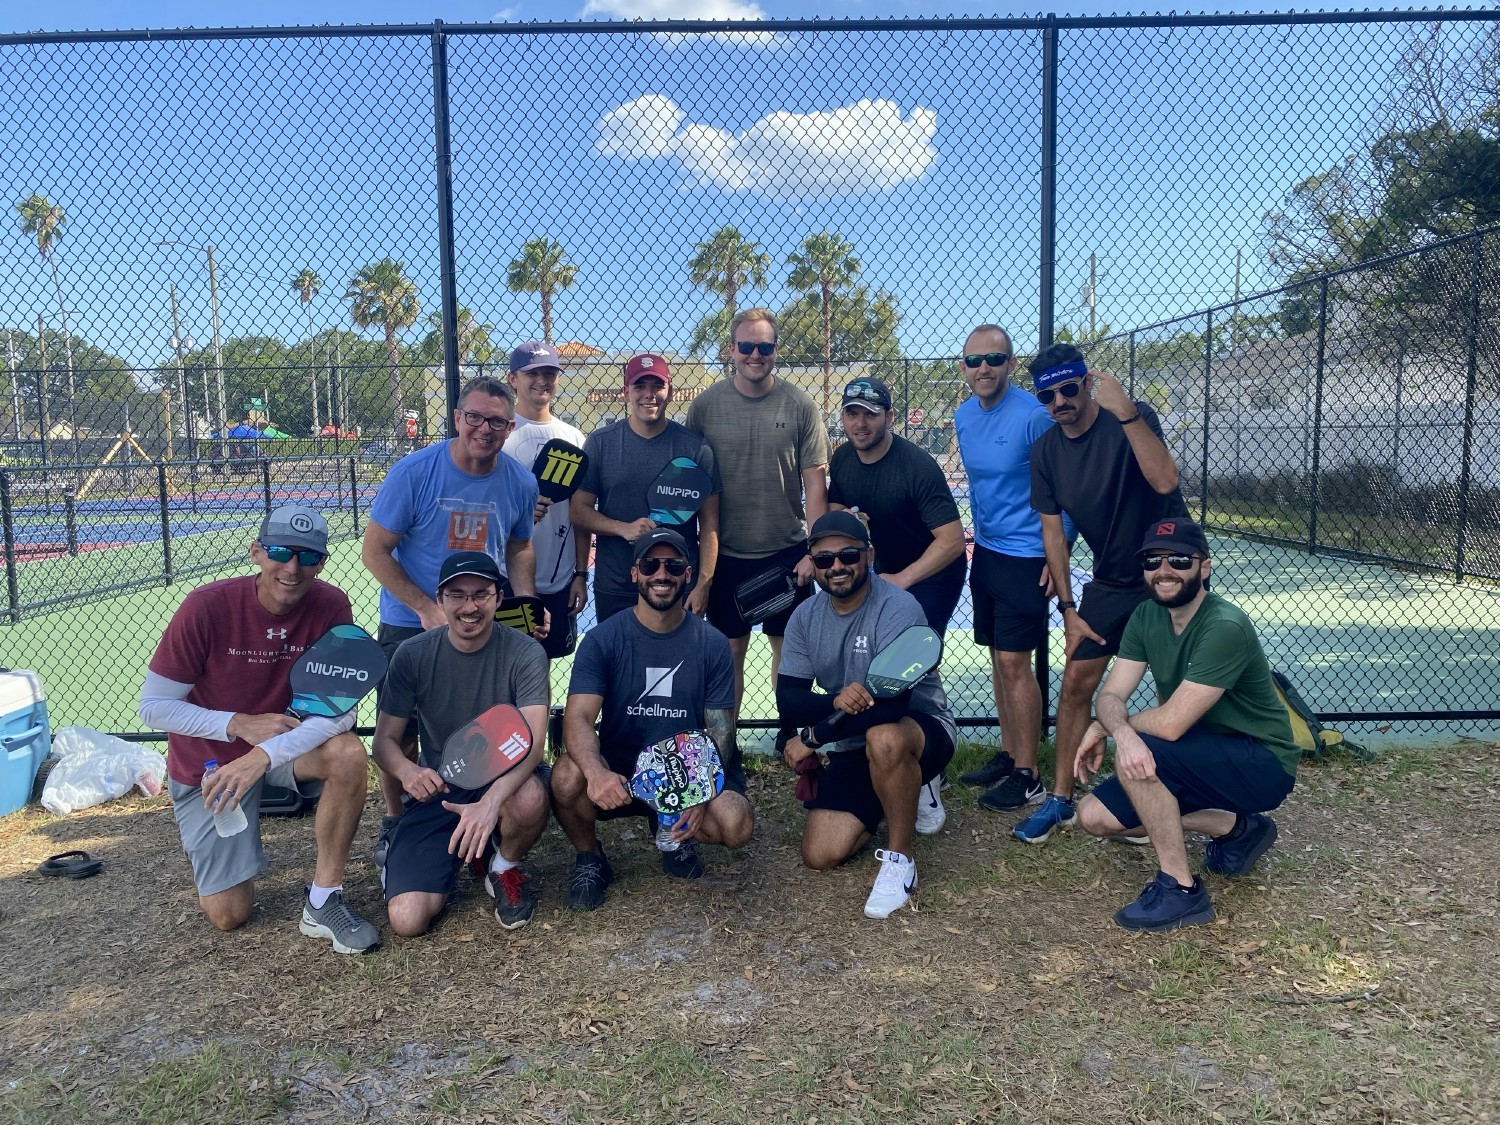 Our Tampa pickleball team gets together outside of work to relax- and a little friend competition.